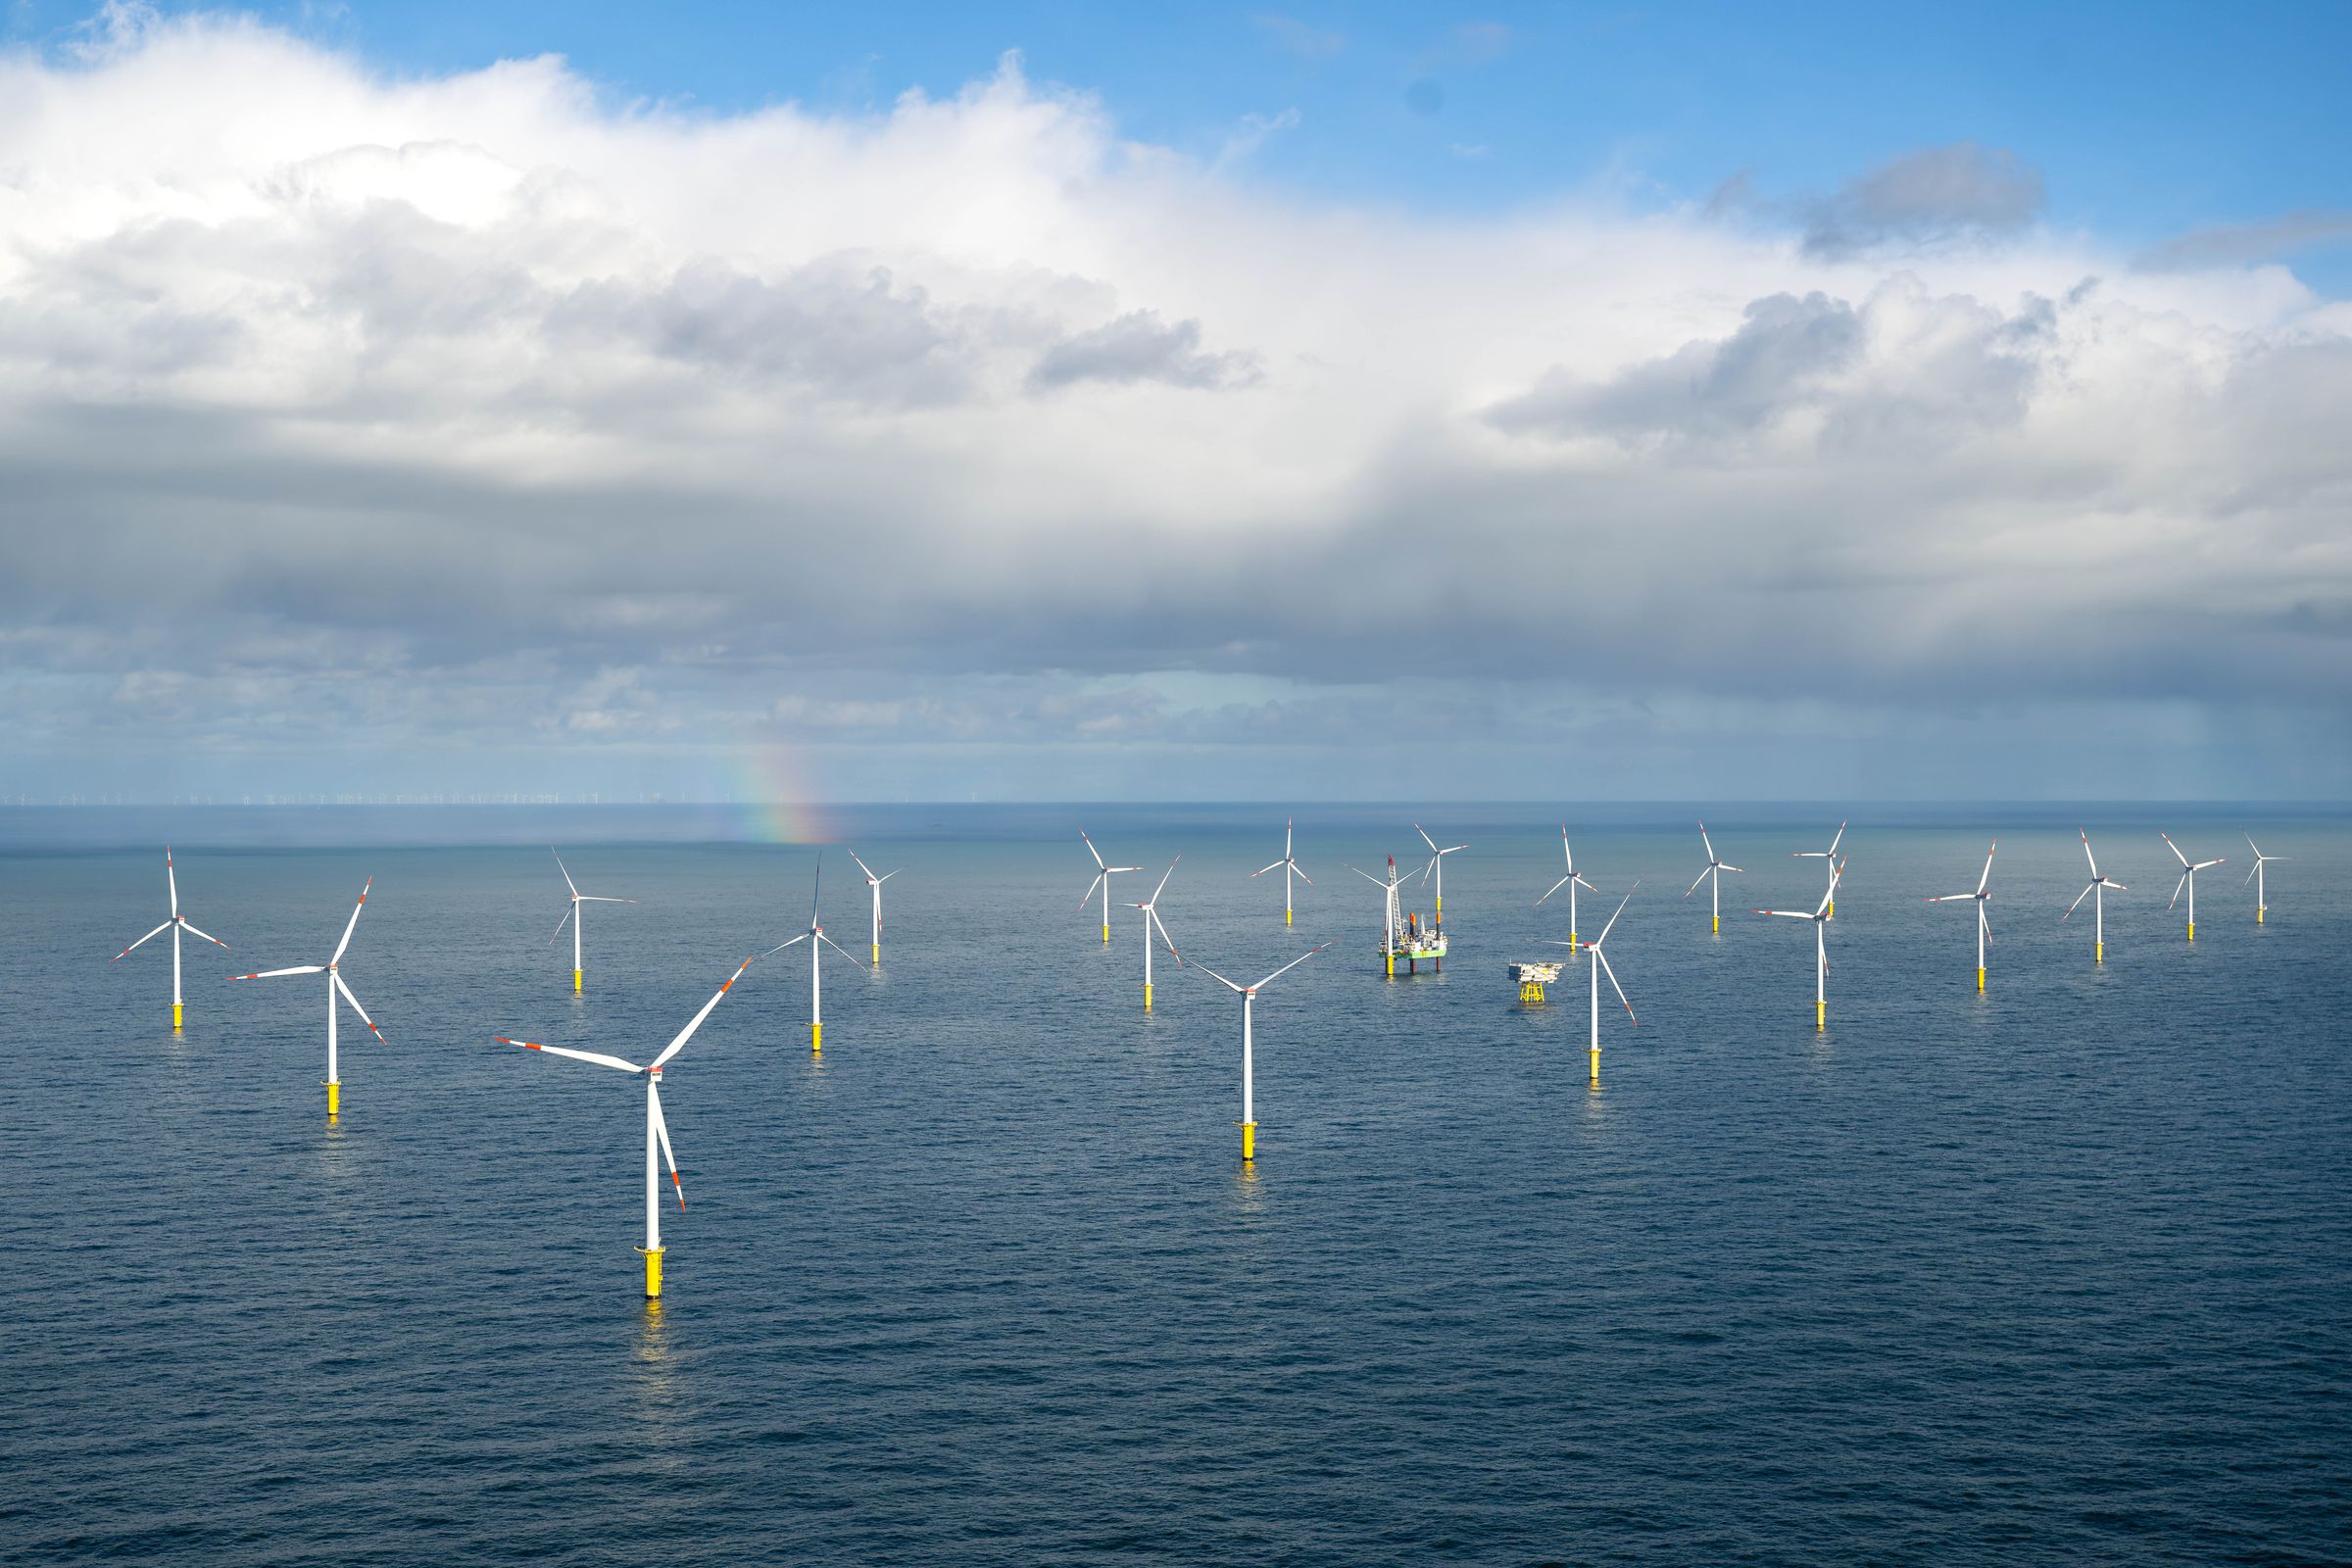 Several rows of wind turbines standing in the sea.